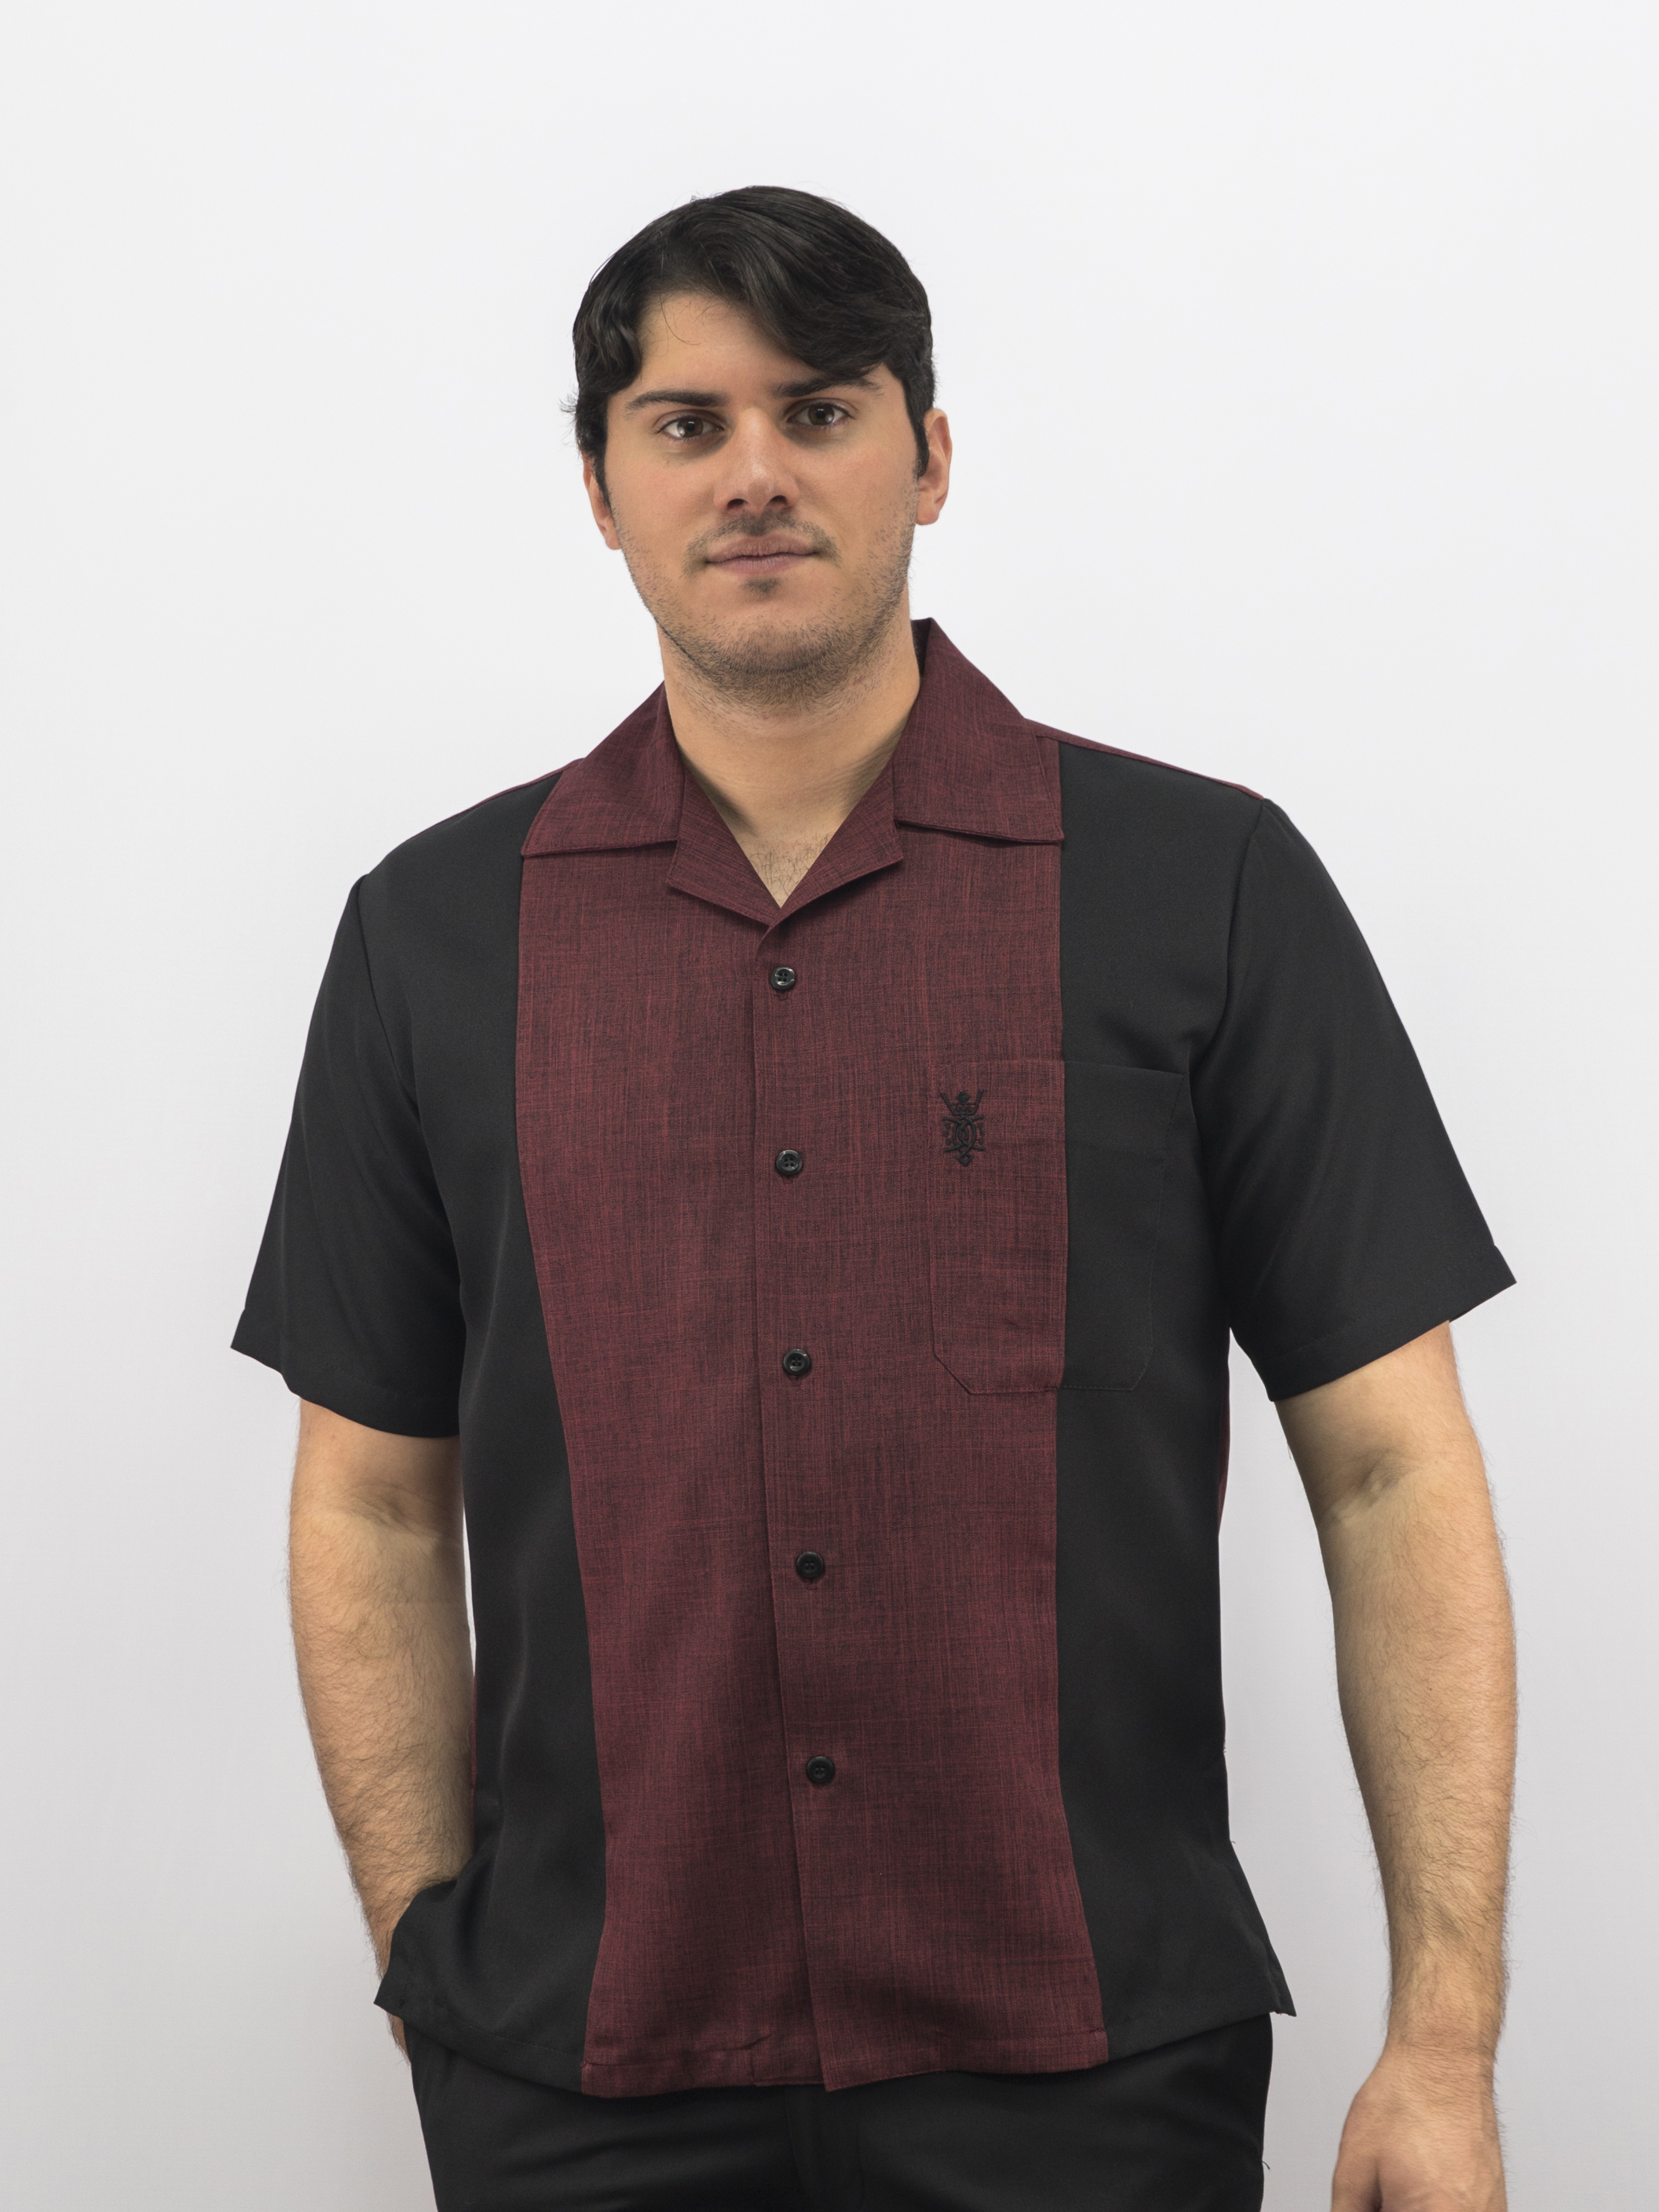 D'Accord Men's Casual Shirt 5032 Burgundy/ Black Made in USA ...